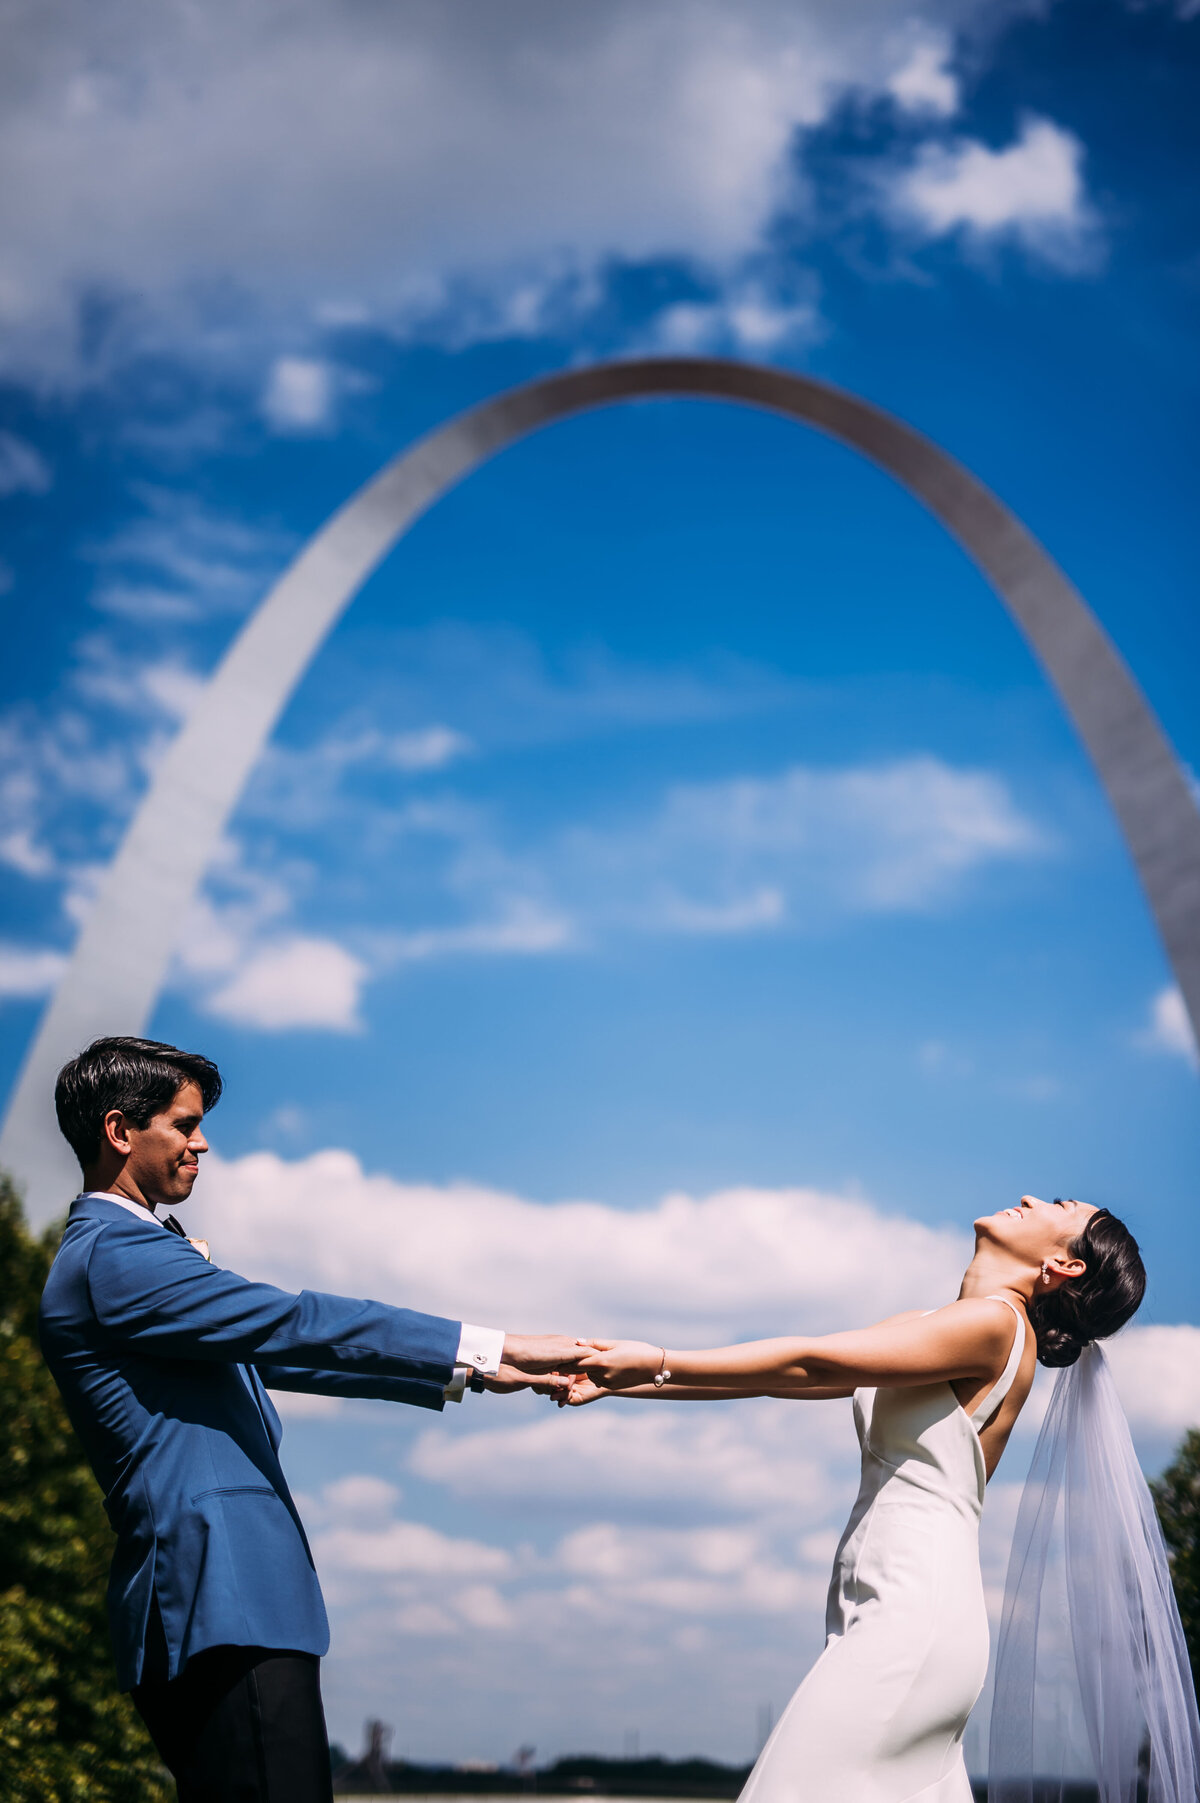 wedding photography at the arch in st louis missouri